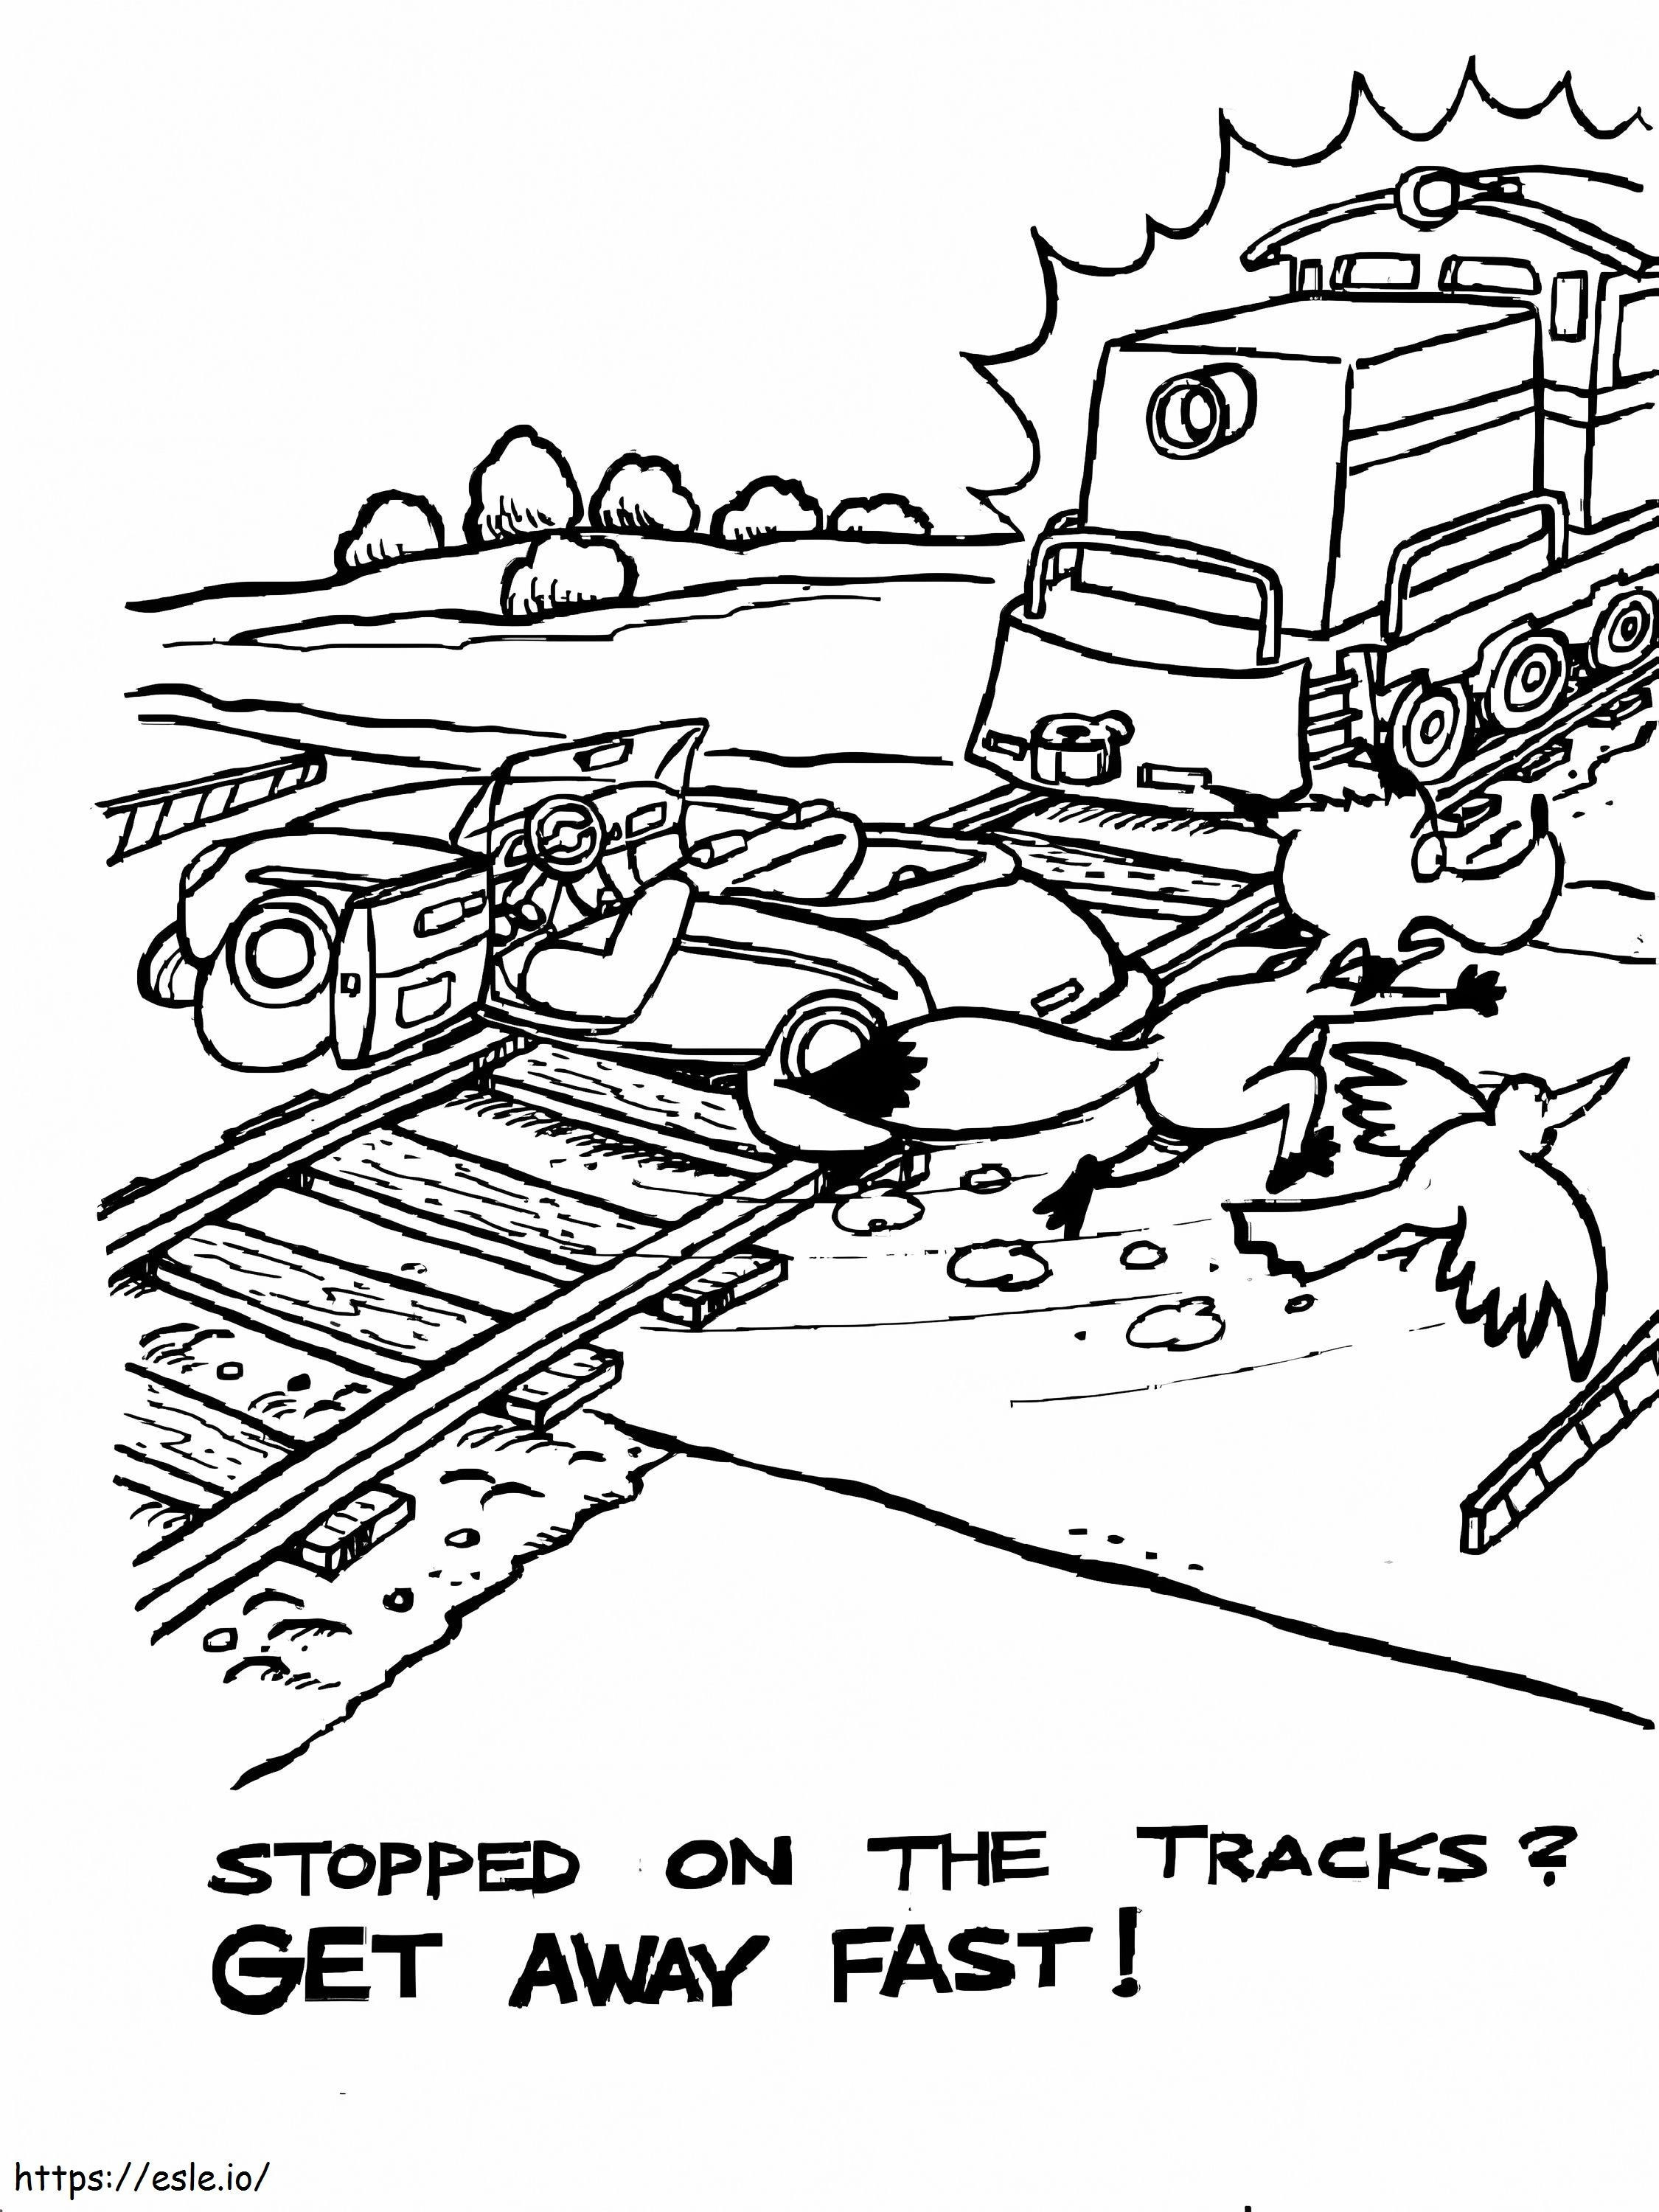 Train Safety Free Printable coloring page